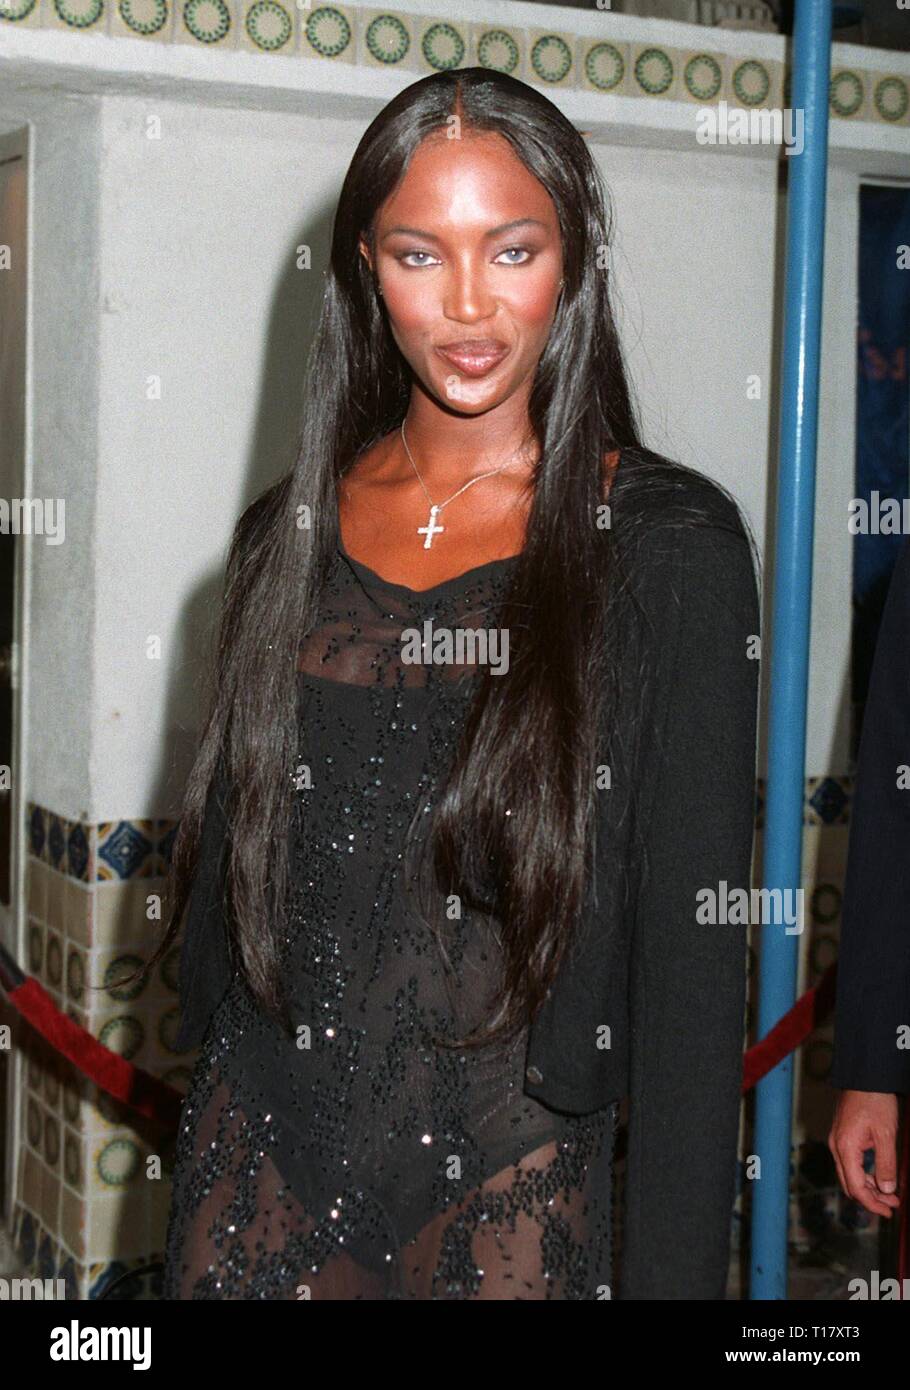 LOS ANGELES, CA. August 06, 1997: Supermodel Naomi Campbell at the premiere, in Los Angeles, of Demi Moore's new movie, 'G.I. Jane.' Stock Photo